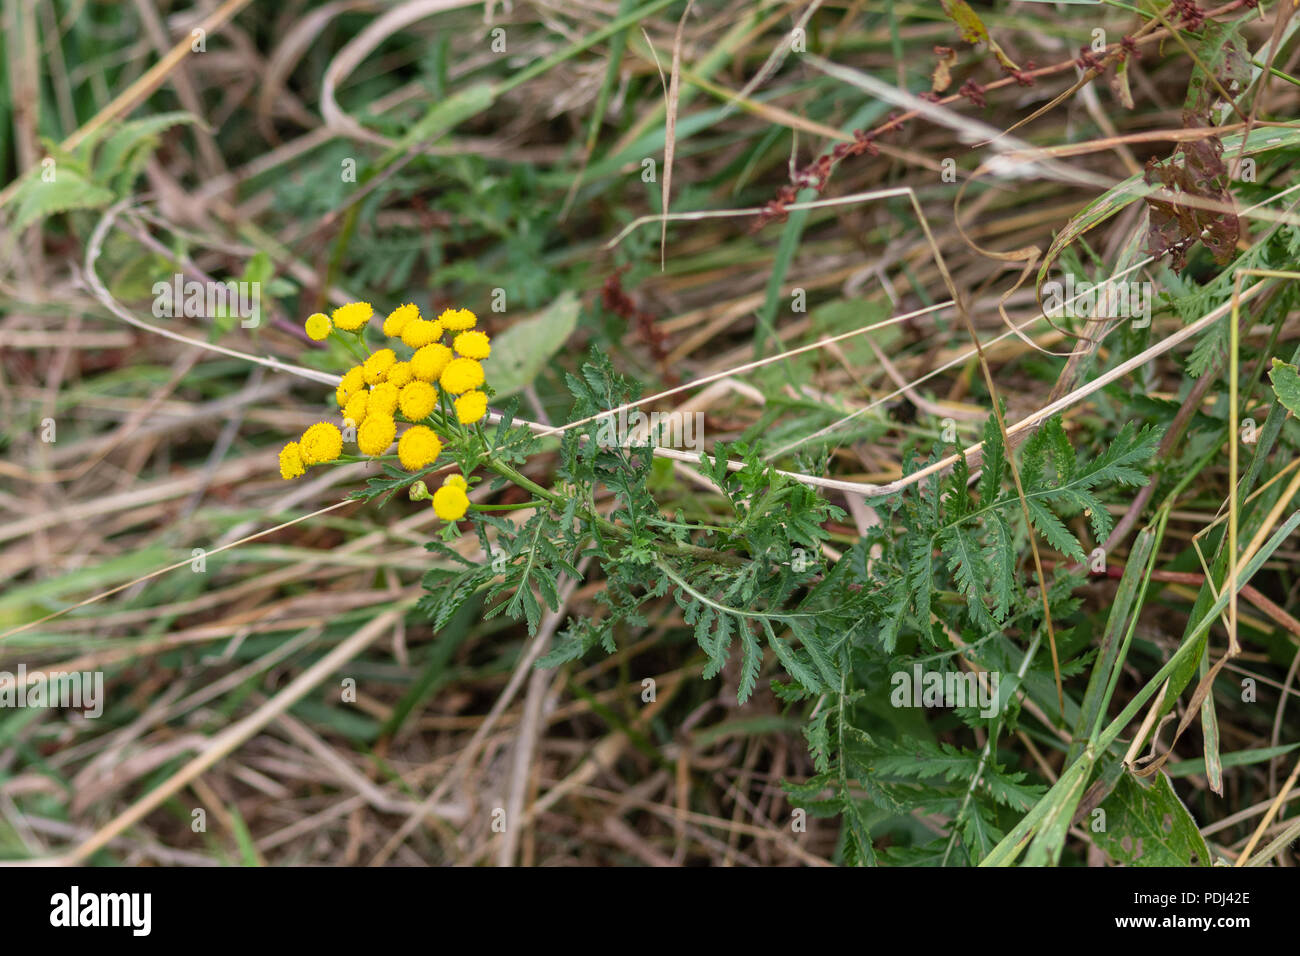 A tansy plant with flowers lying almost horizontal against long grass next to a path Stock Photo